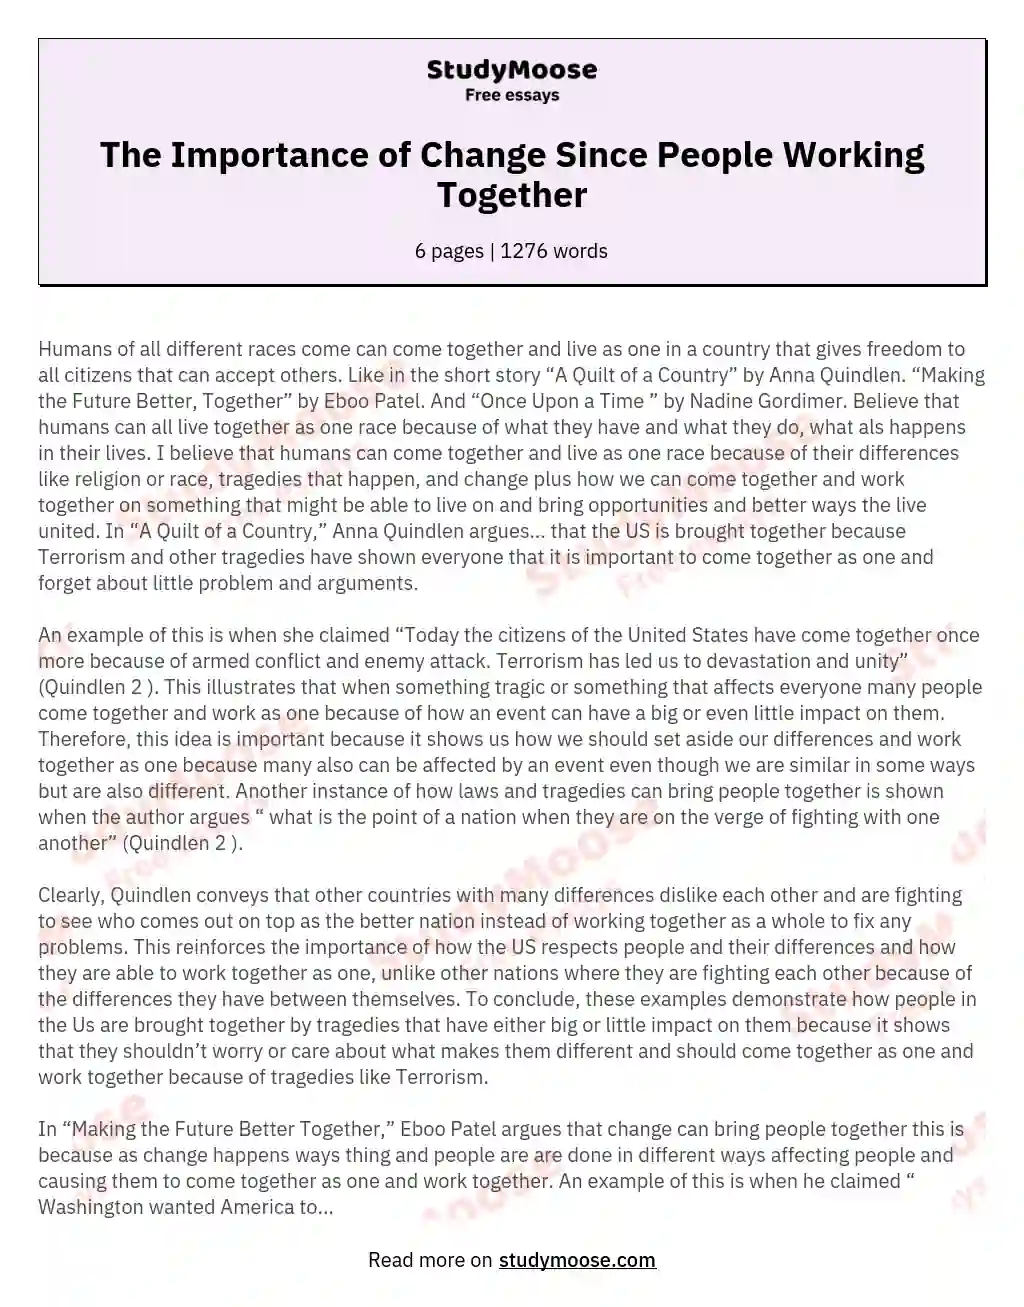 The Importance of Change Since People Working Together essay